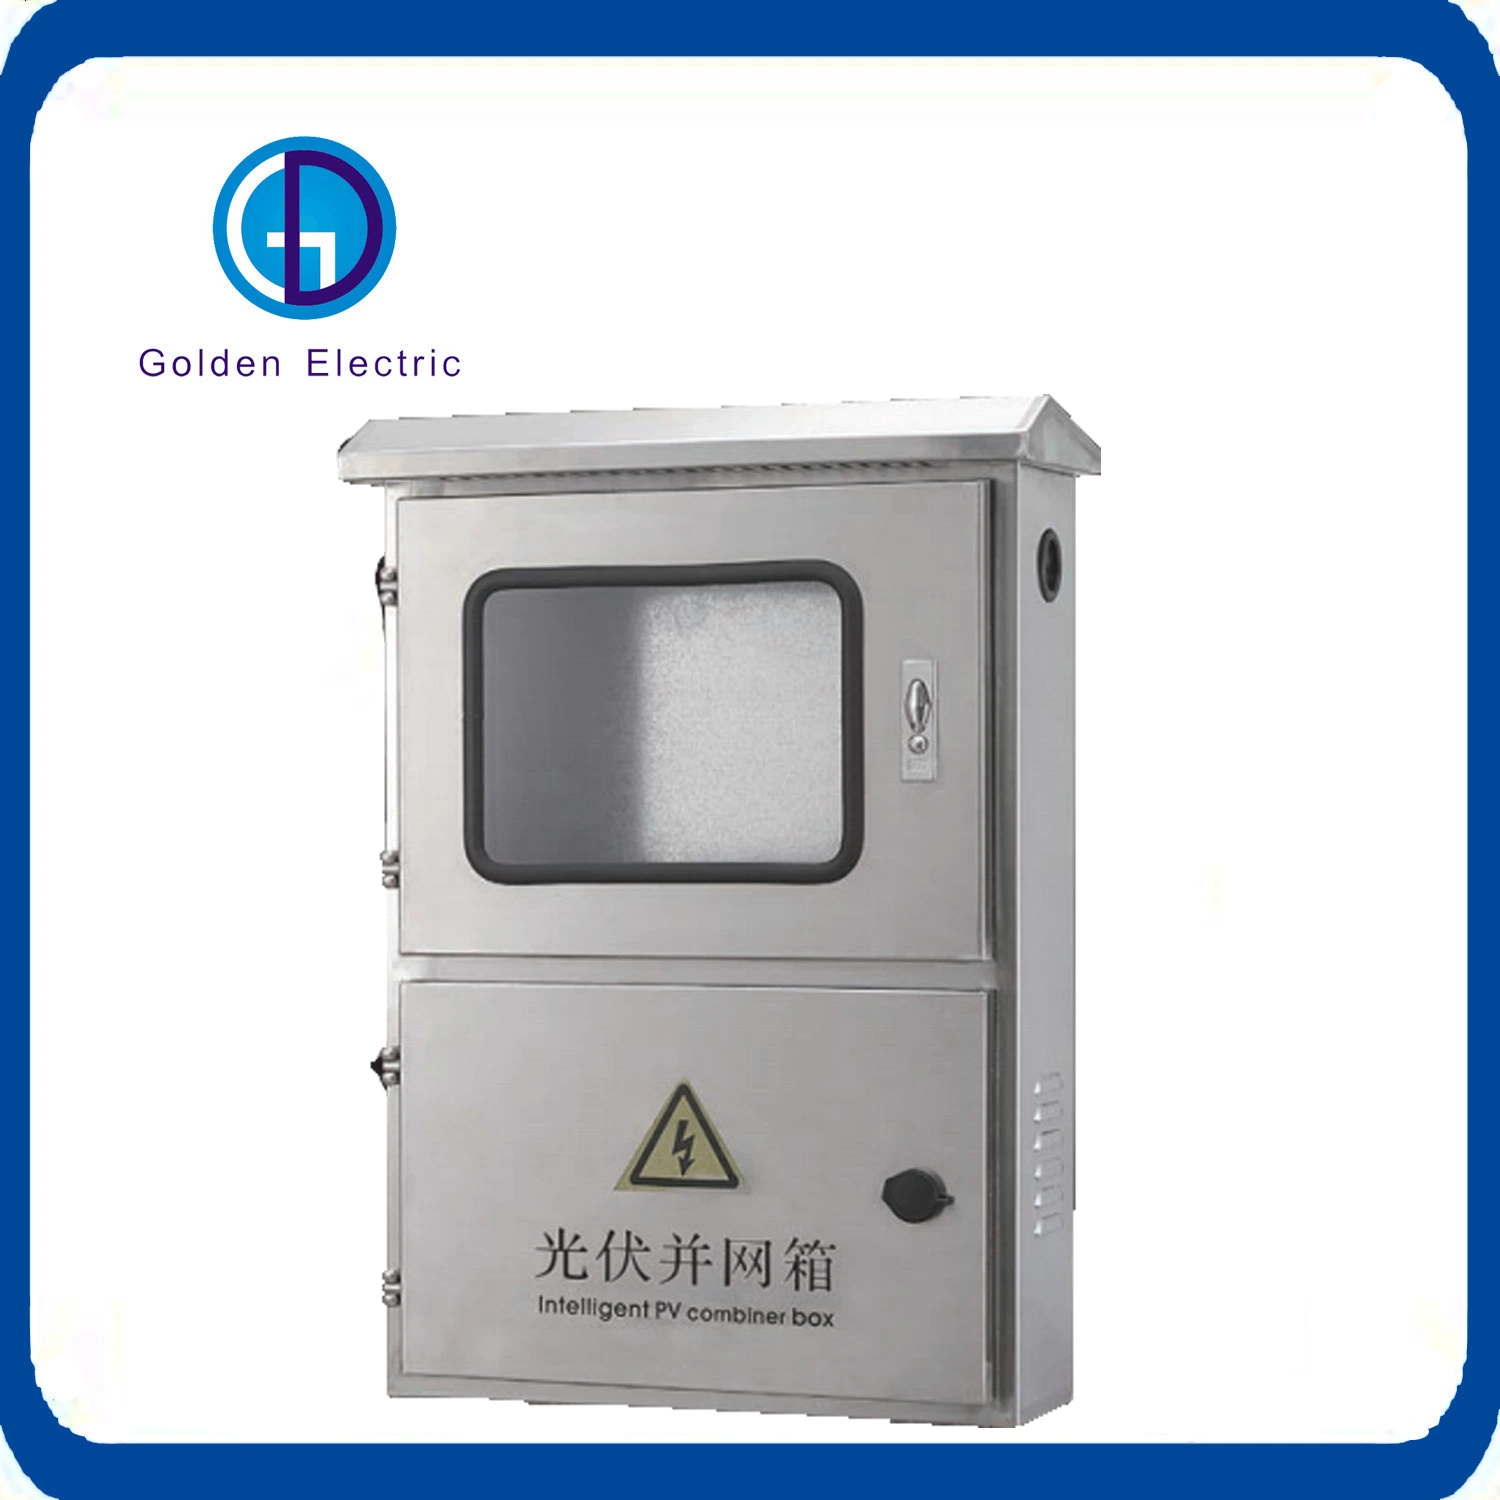 Outdoor Stainless Steel Photovoltaic Grid-Connected Box PV Lightning Protection Combiner Box Single-Phase Three-Phase Meter Box